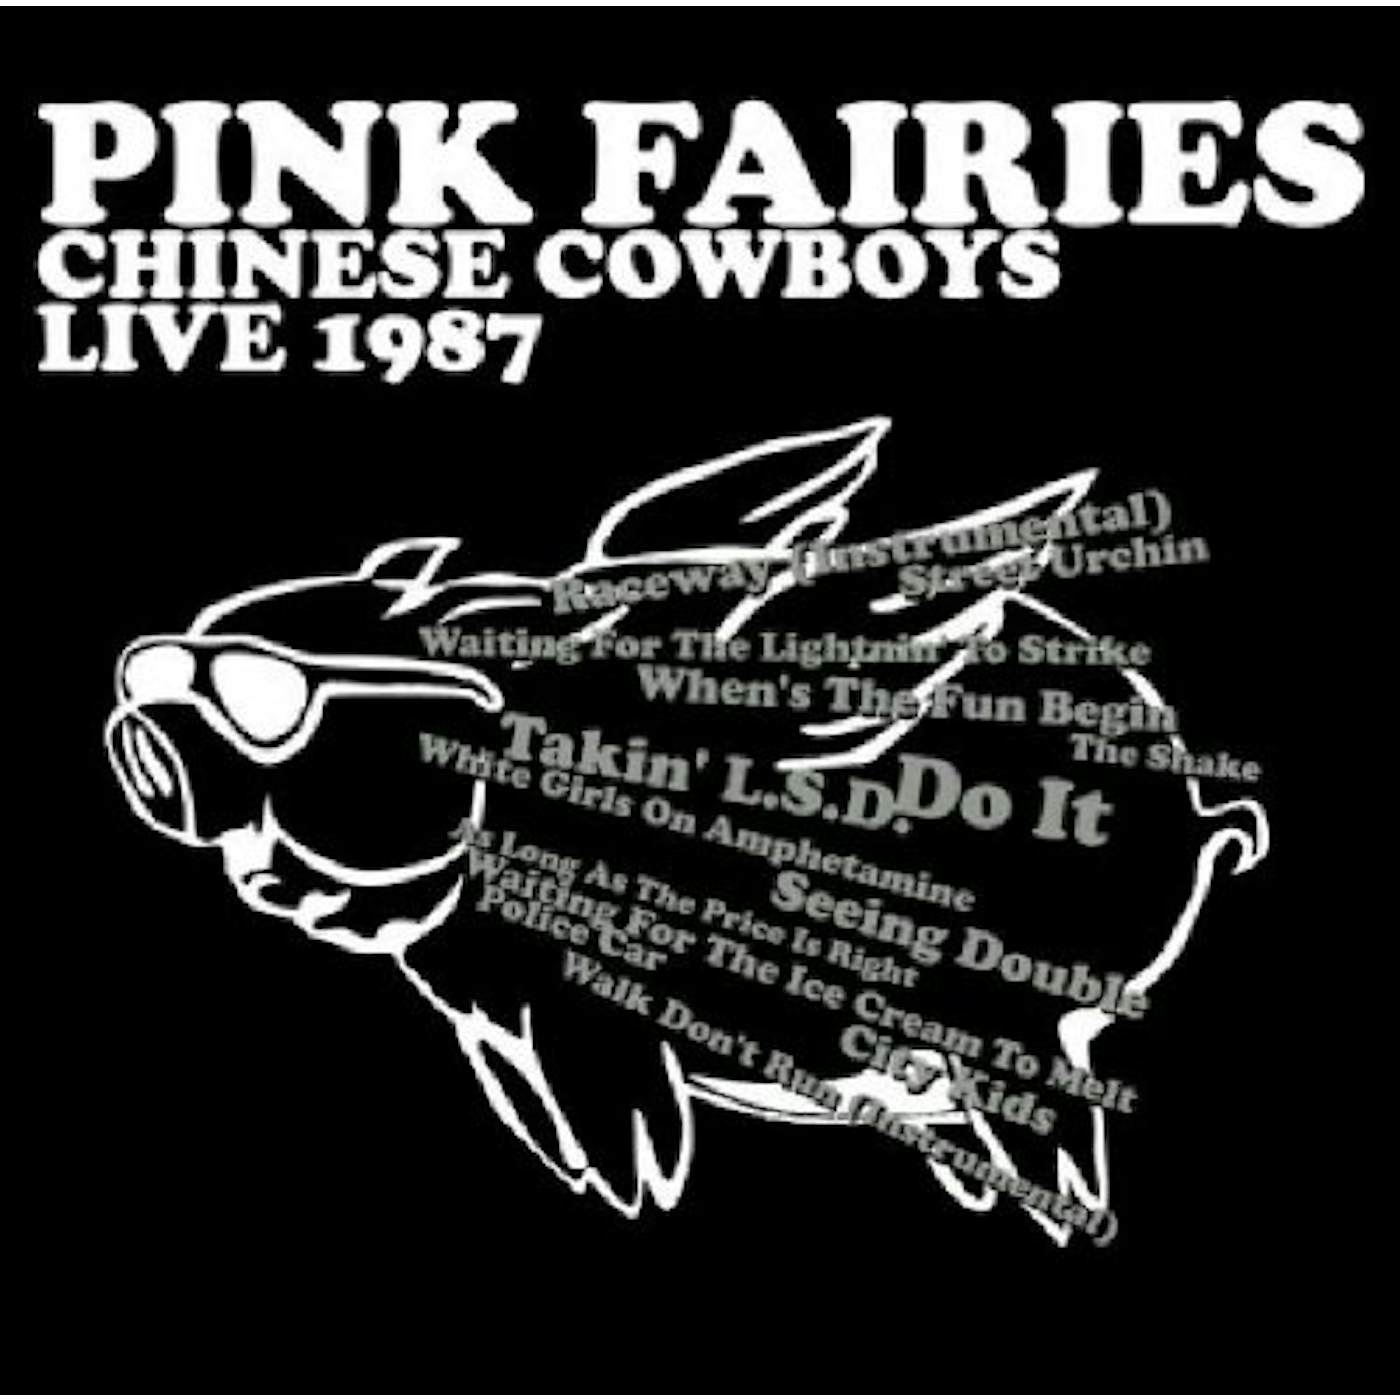 The Pink Fairies CHINESE COWBOYS LIVE 1987 CD